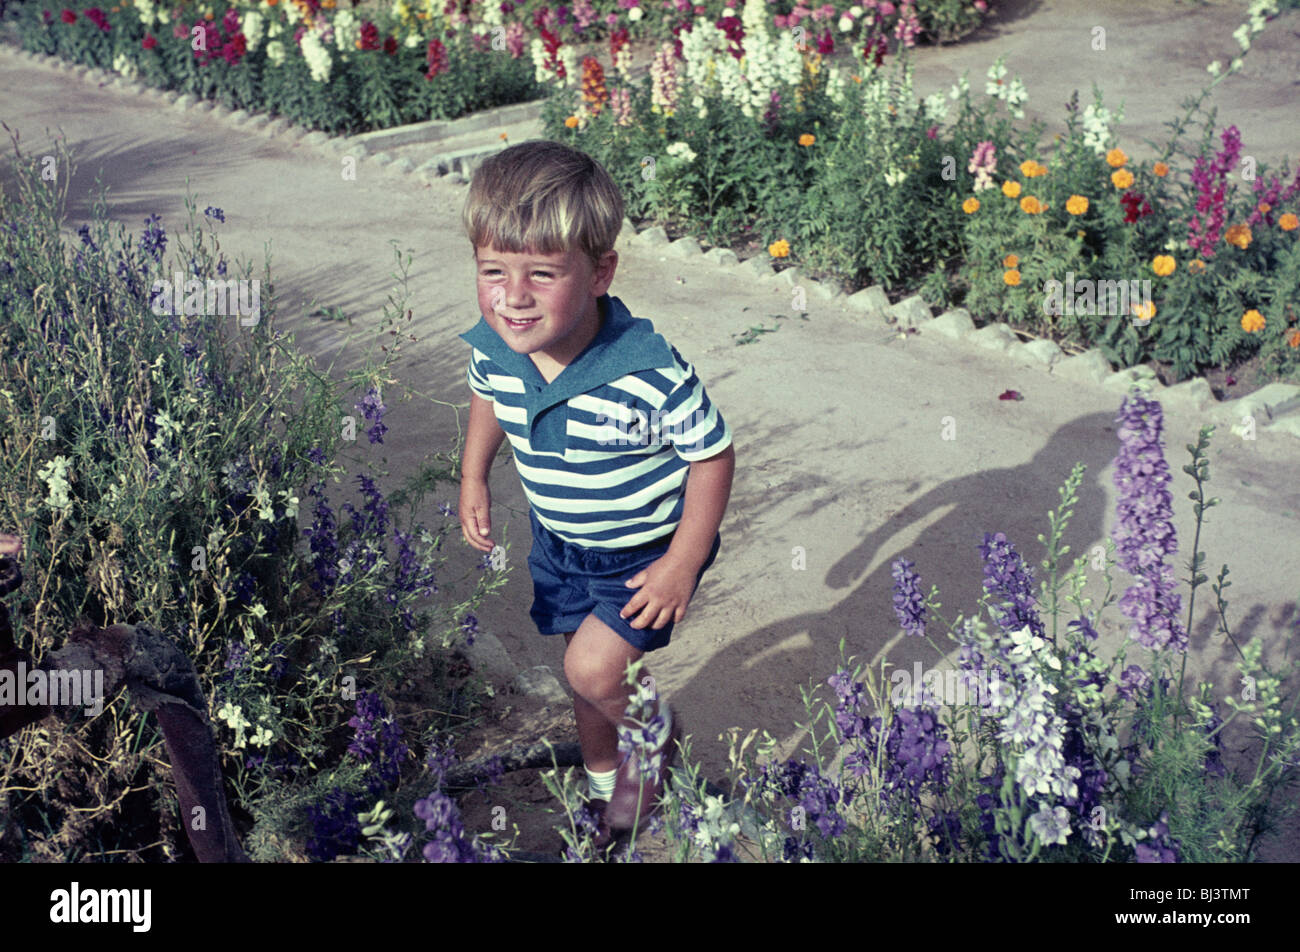 A young boy of about 5 years-old from the mid-sixties plays amongst lavender in his parents’ garden. Stock Photo